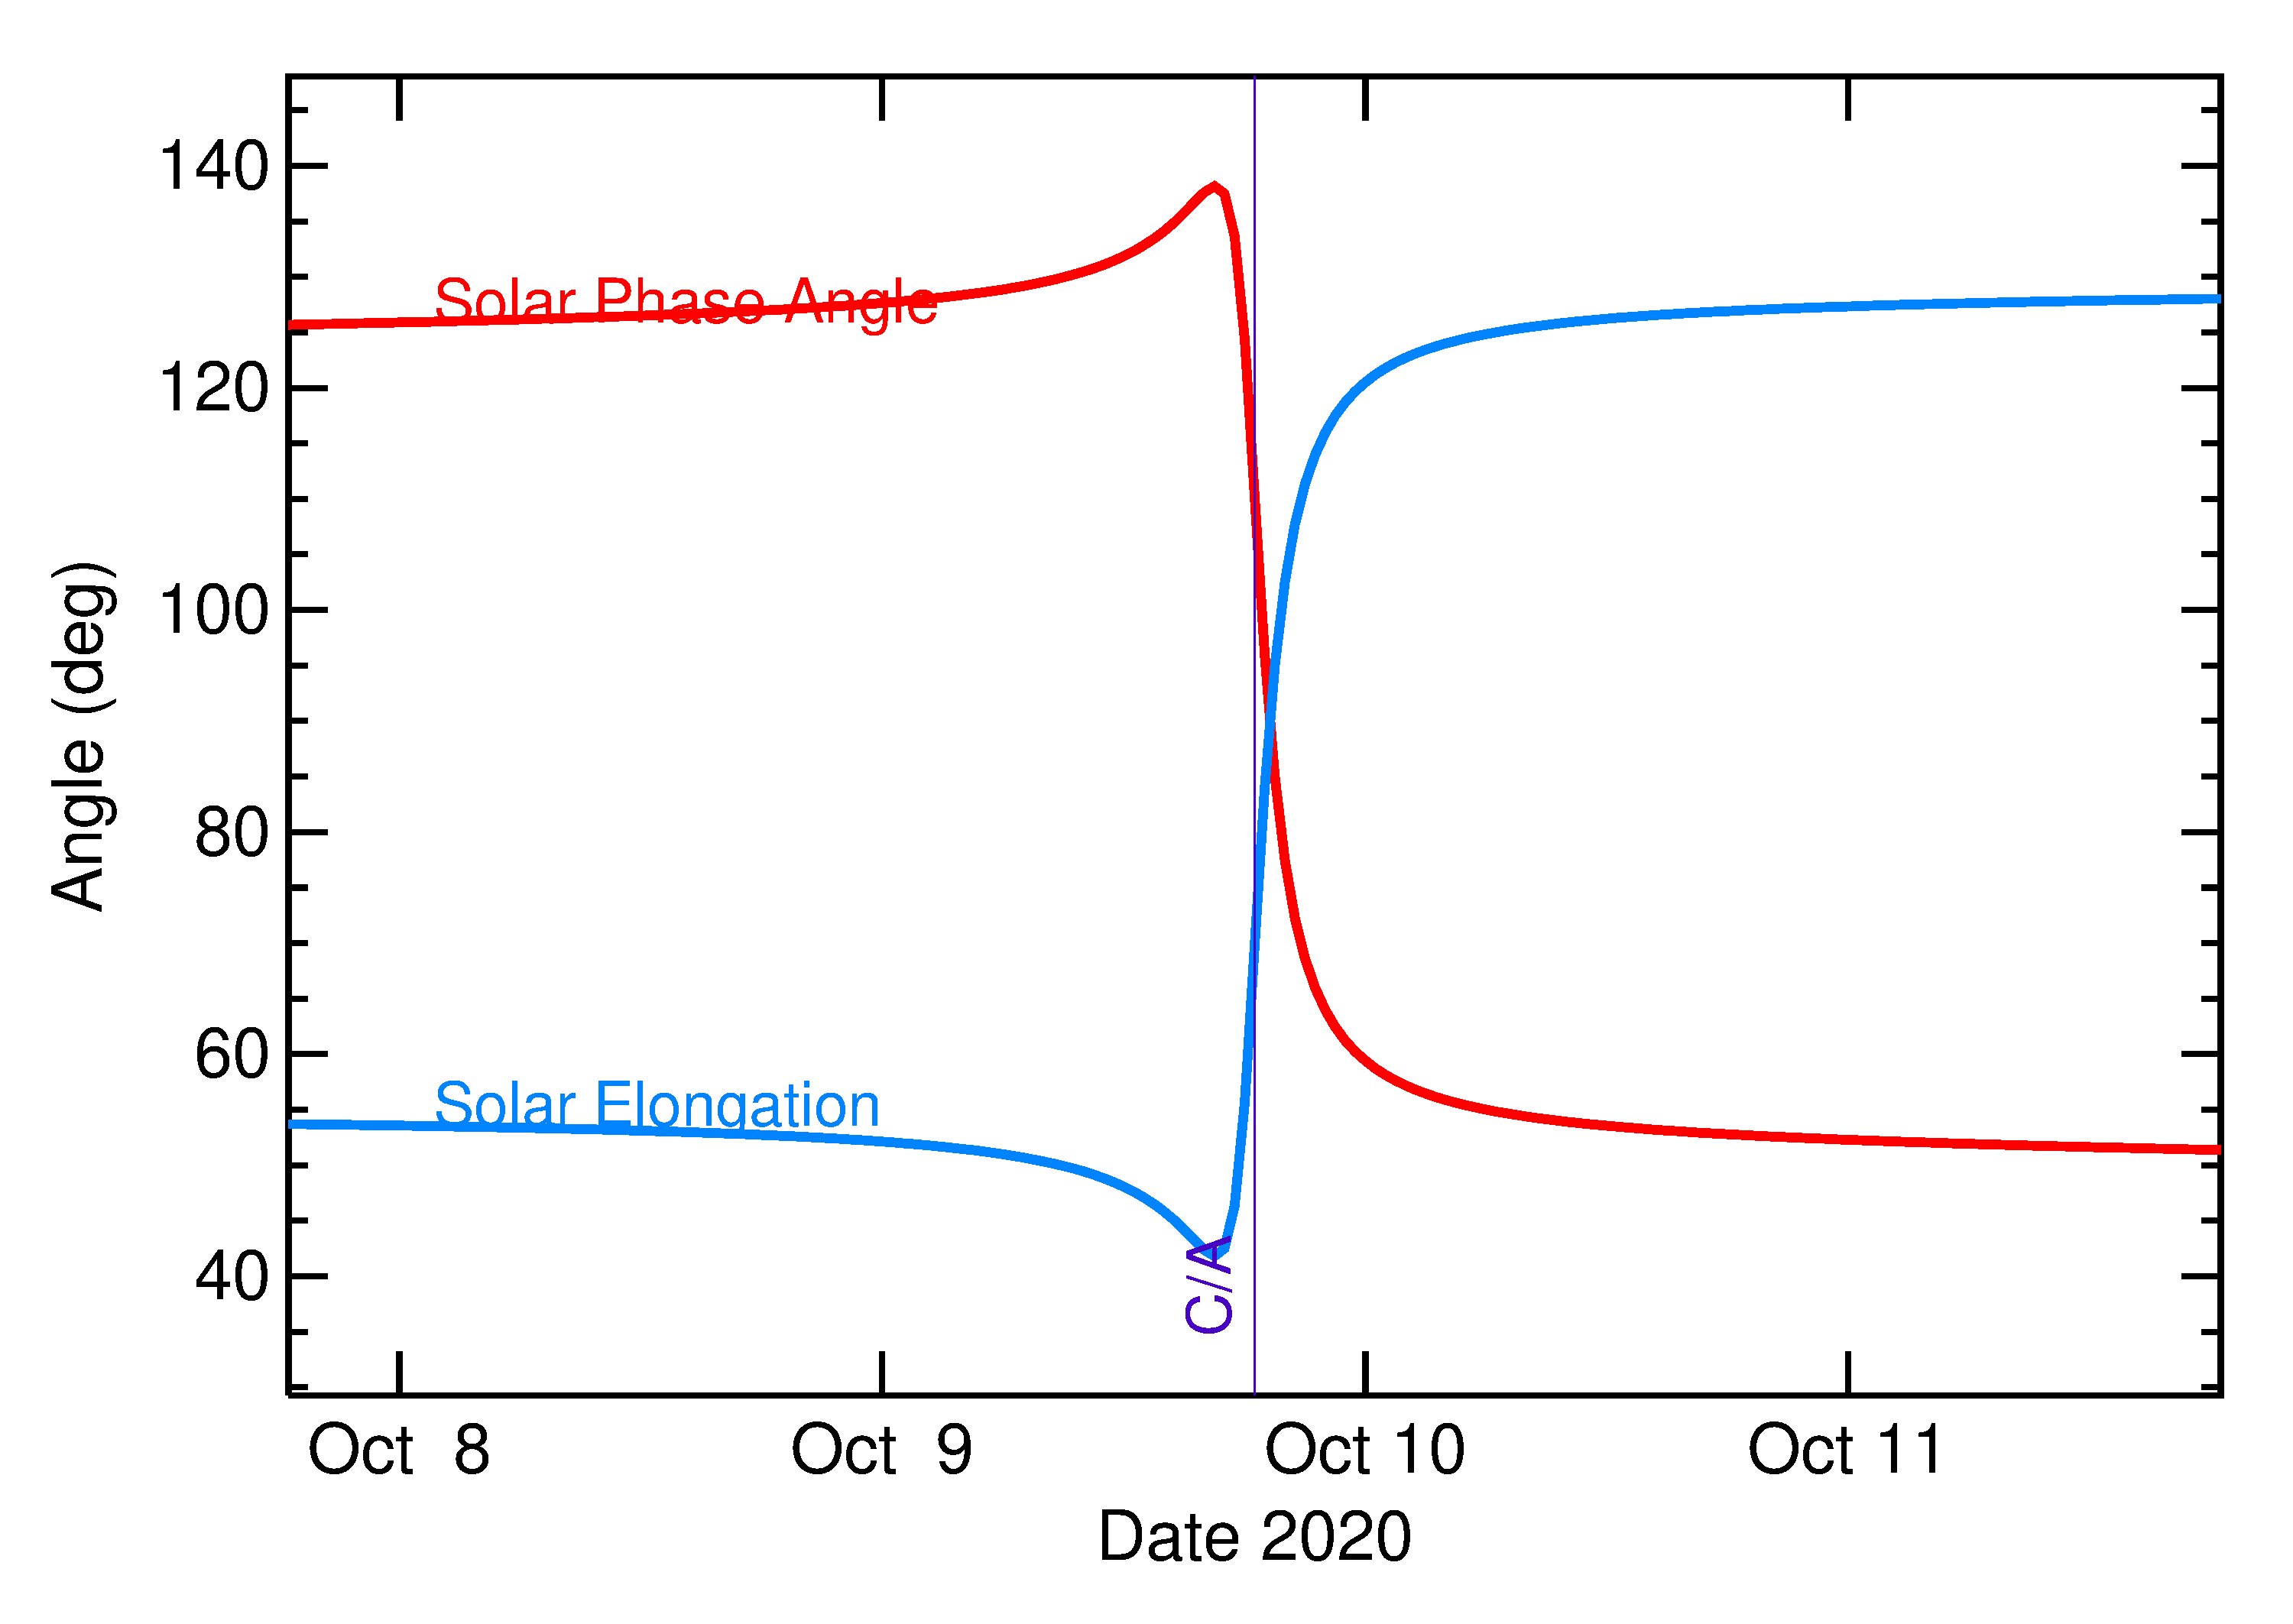 Solar Elongation and Solar Phase Angle of 2020 TE5 in the days around closest approach